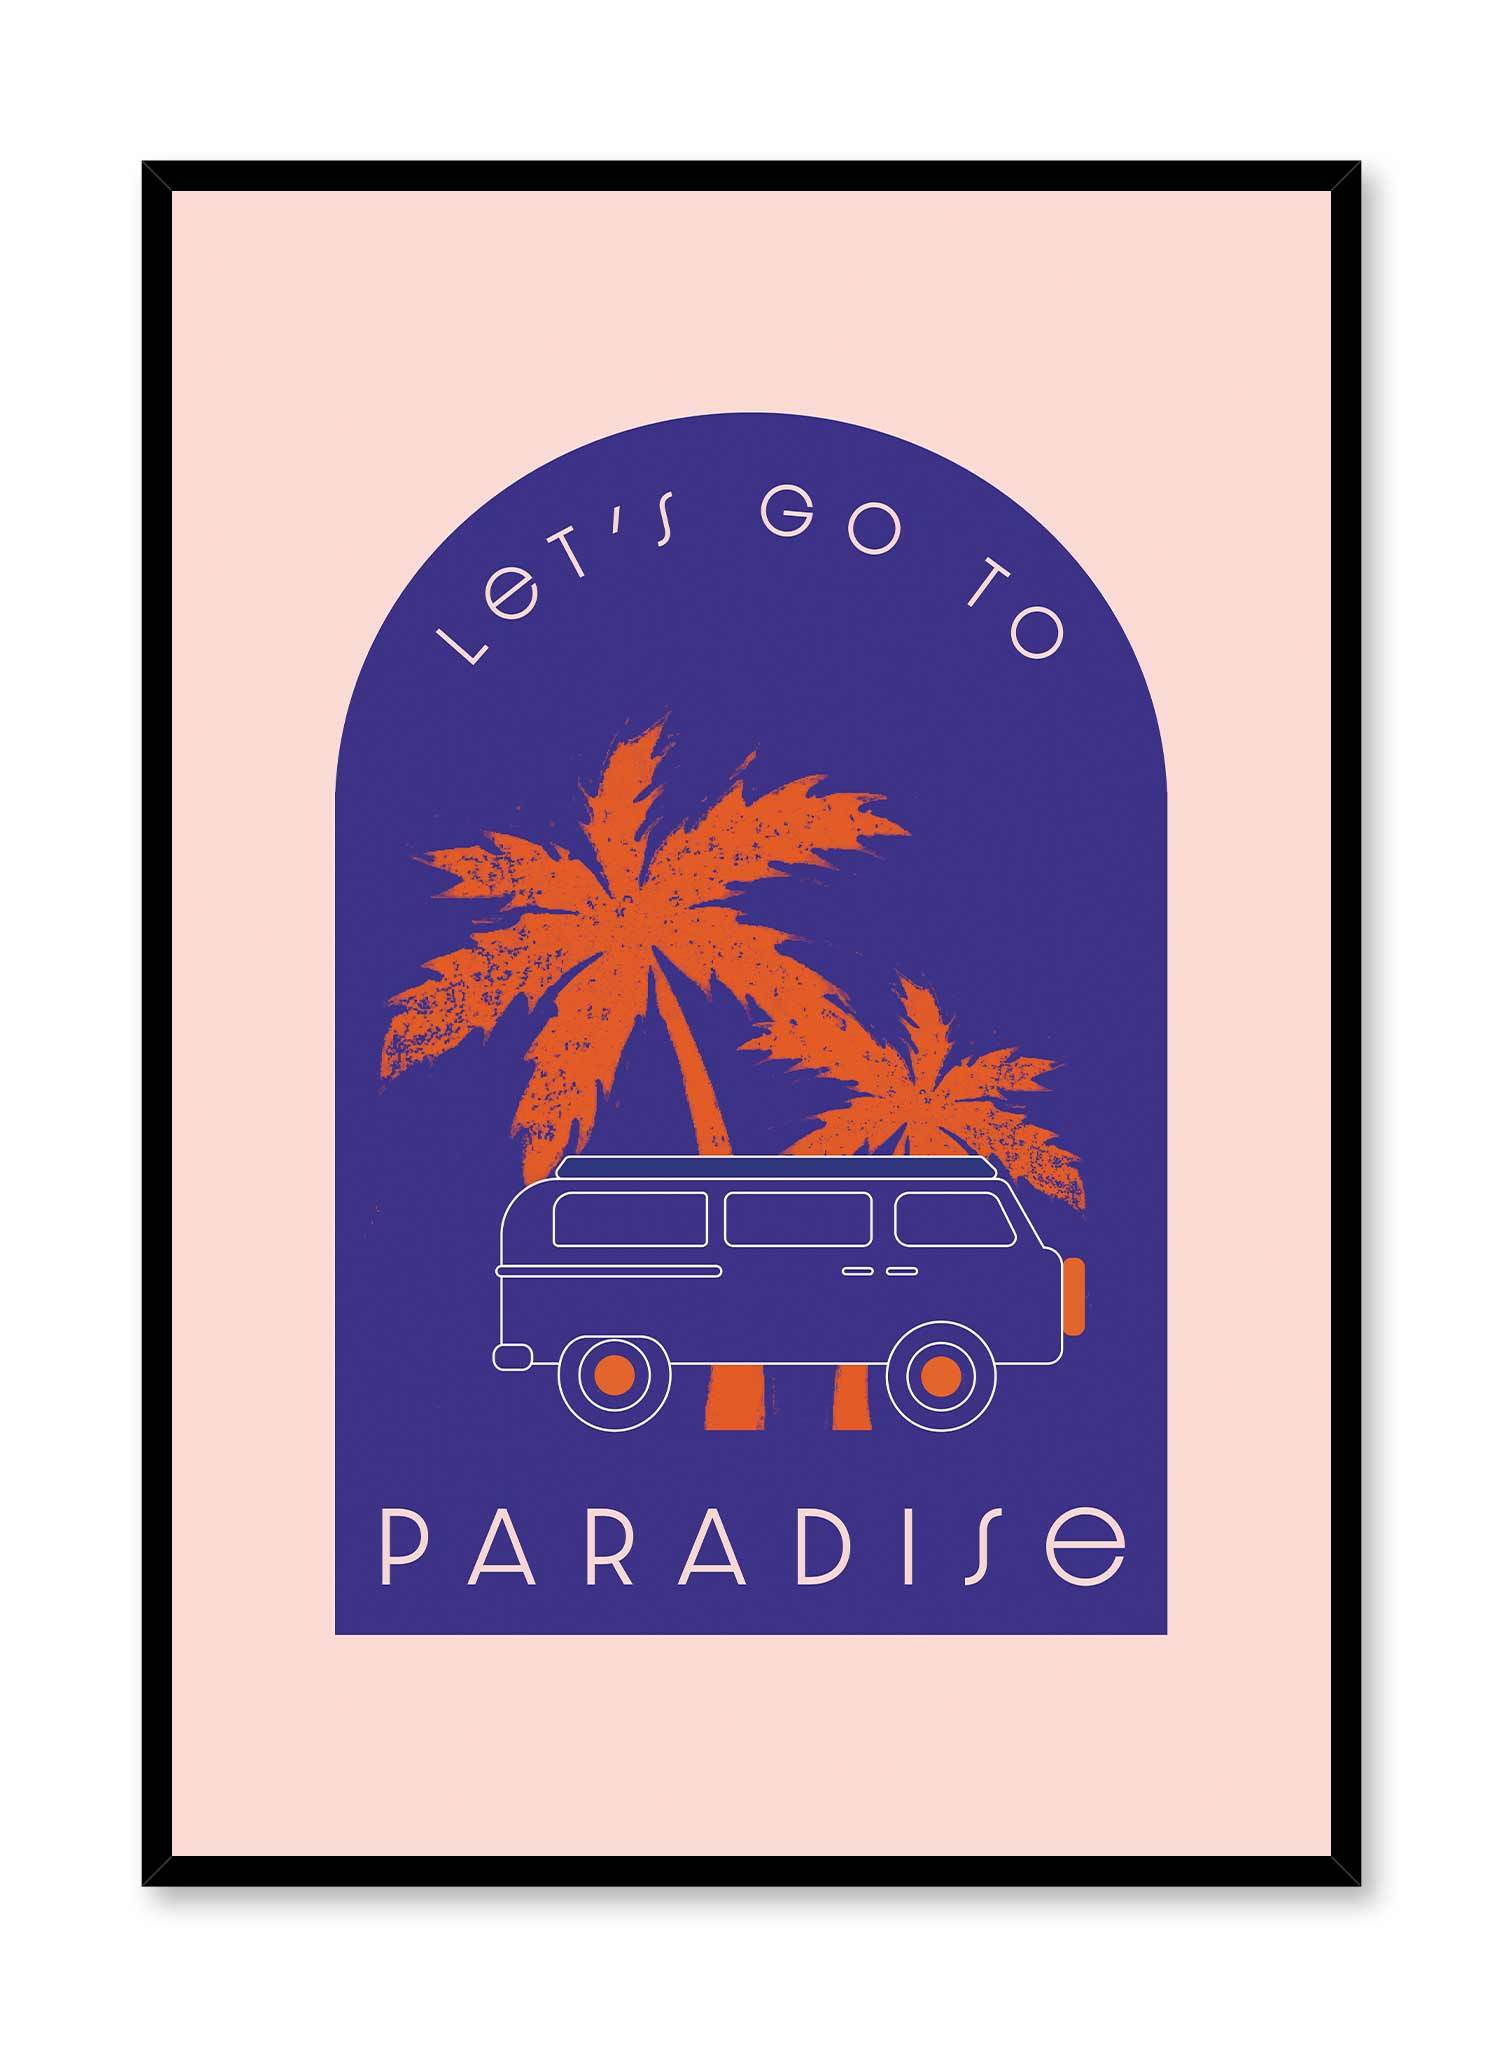 This Way to Paradise is a retro illustration poster of a Winnebago van layered over palm trees by Opposite Wall.